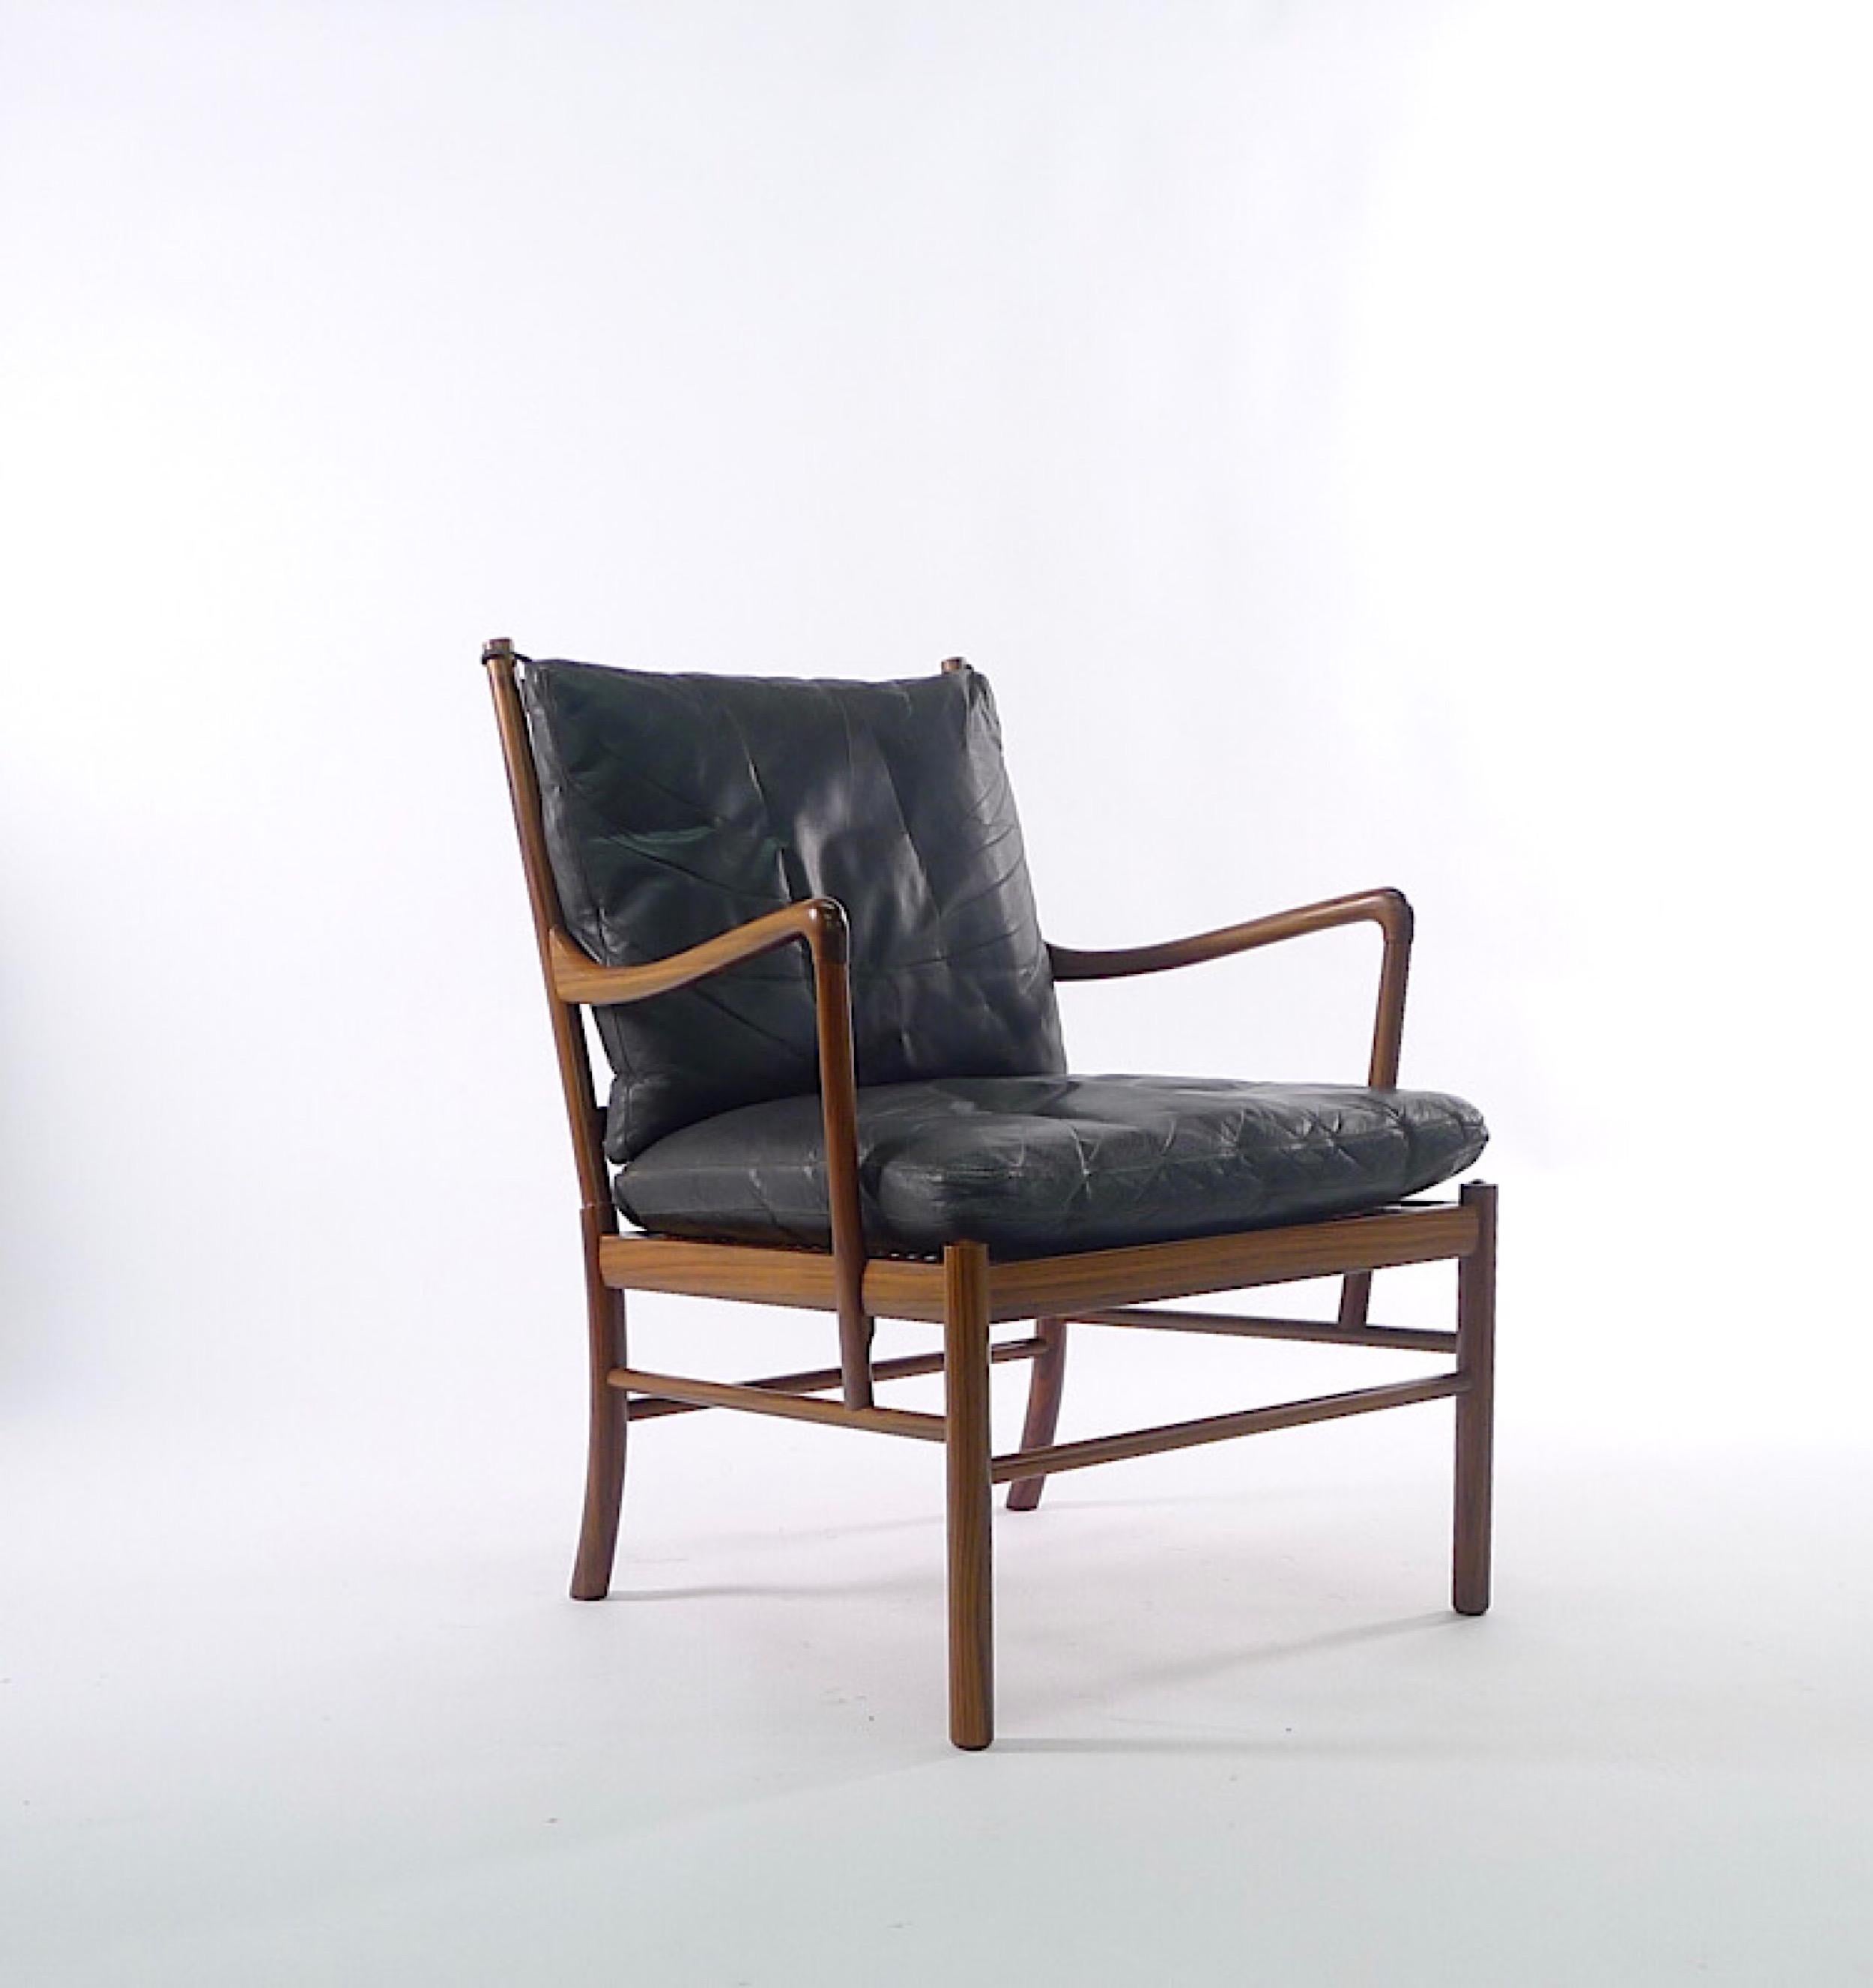 Ole Wanscher, Colonial Chair, model PJ149, designed 1949, manufactured by Poul Jeppesen mobelfabrik in 1950s

Rosewood frame with cane seat. 

Choice of leather cushions in either black or caramel leather

Ole Wanscher, Colonial Chair, model